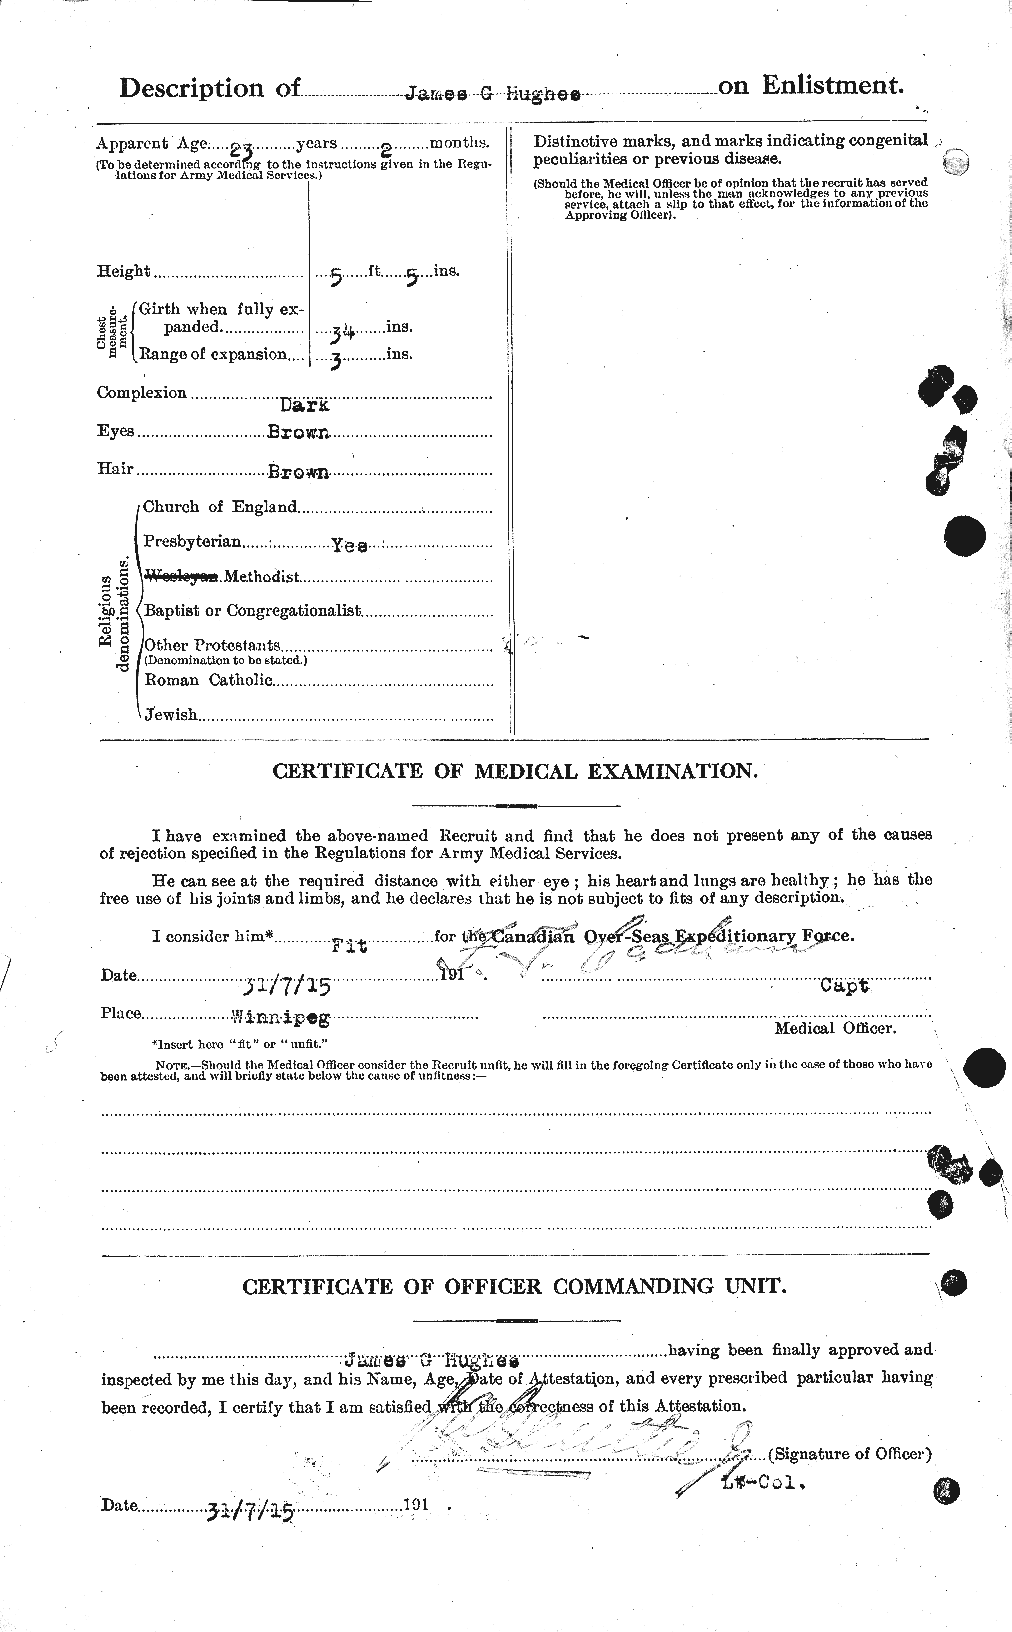 Personnel Records of the First World War - CEF 403962b